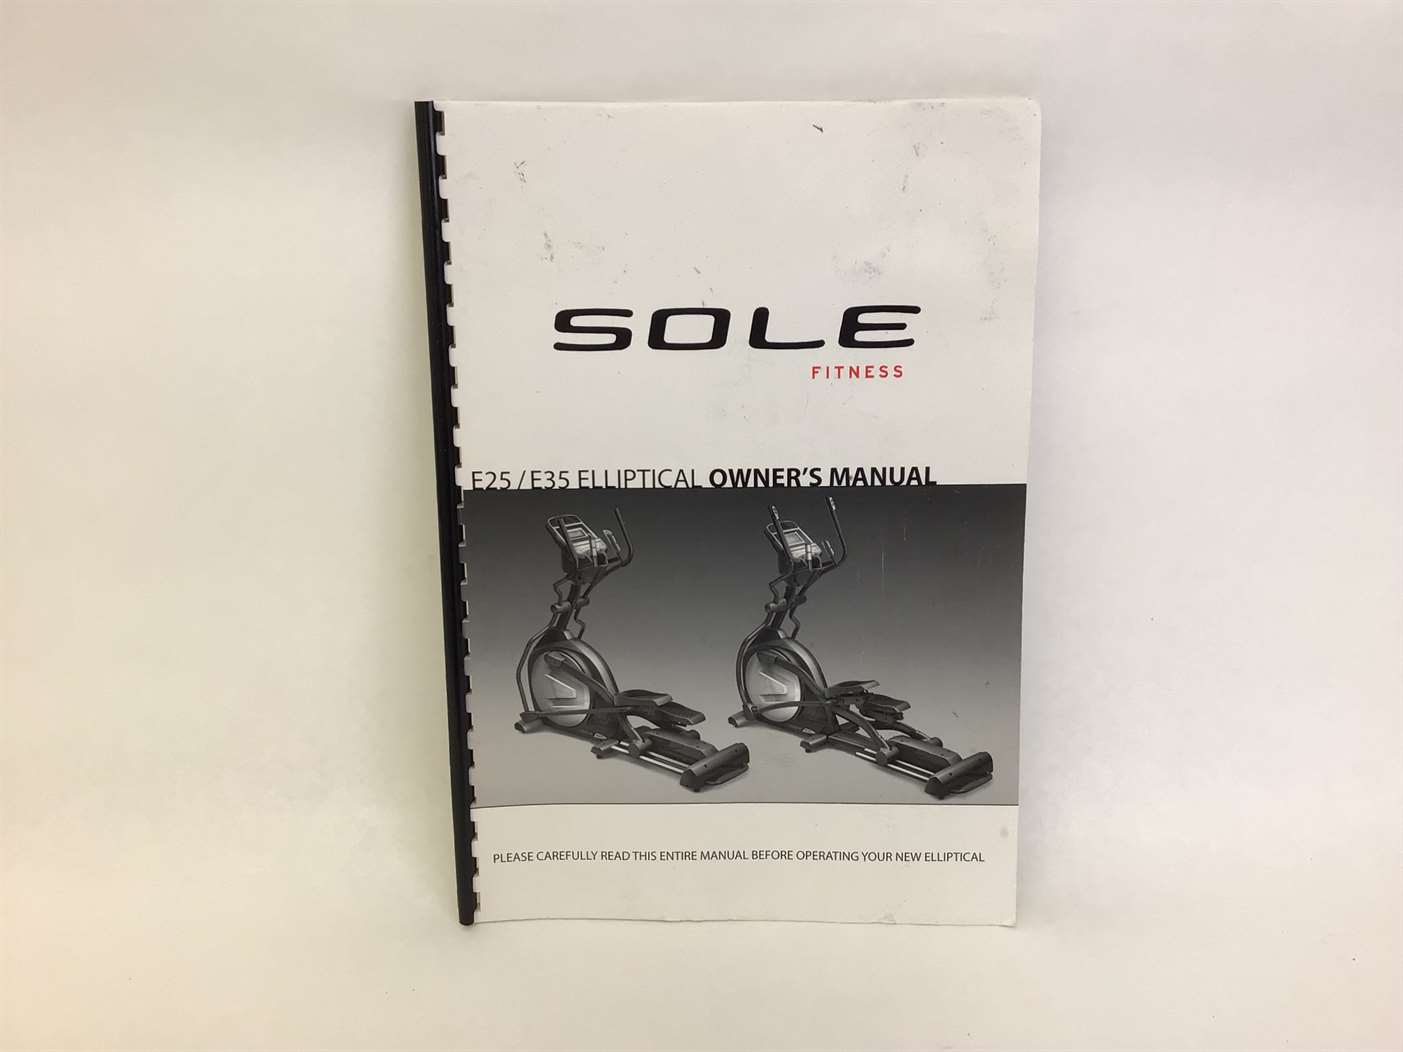 OWNER’S MANUAL (Used)